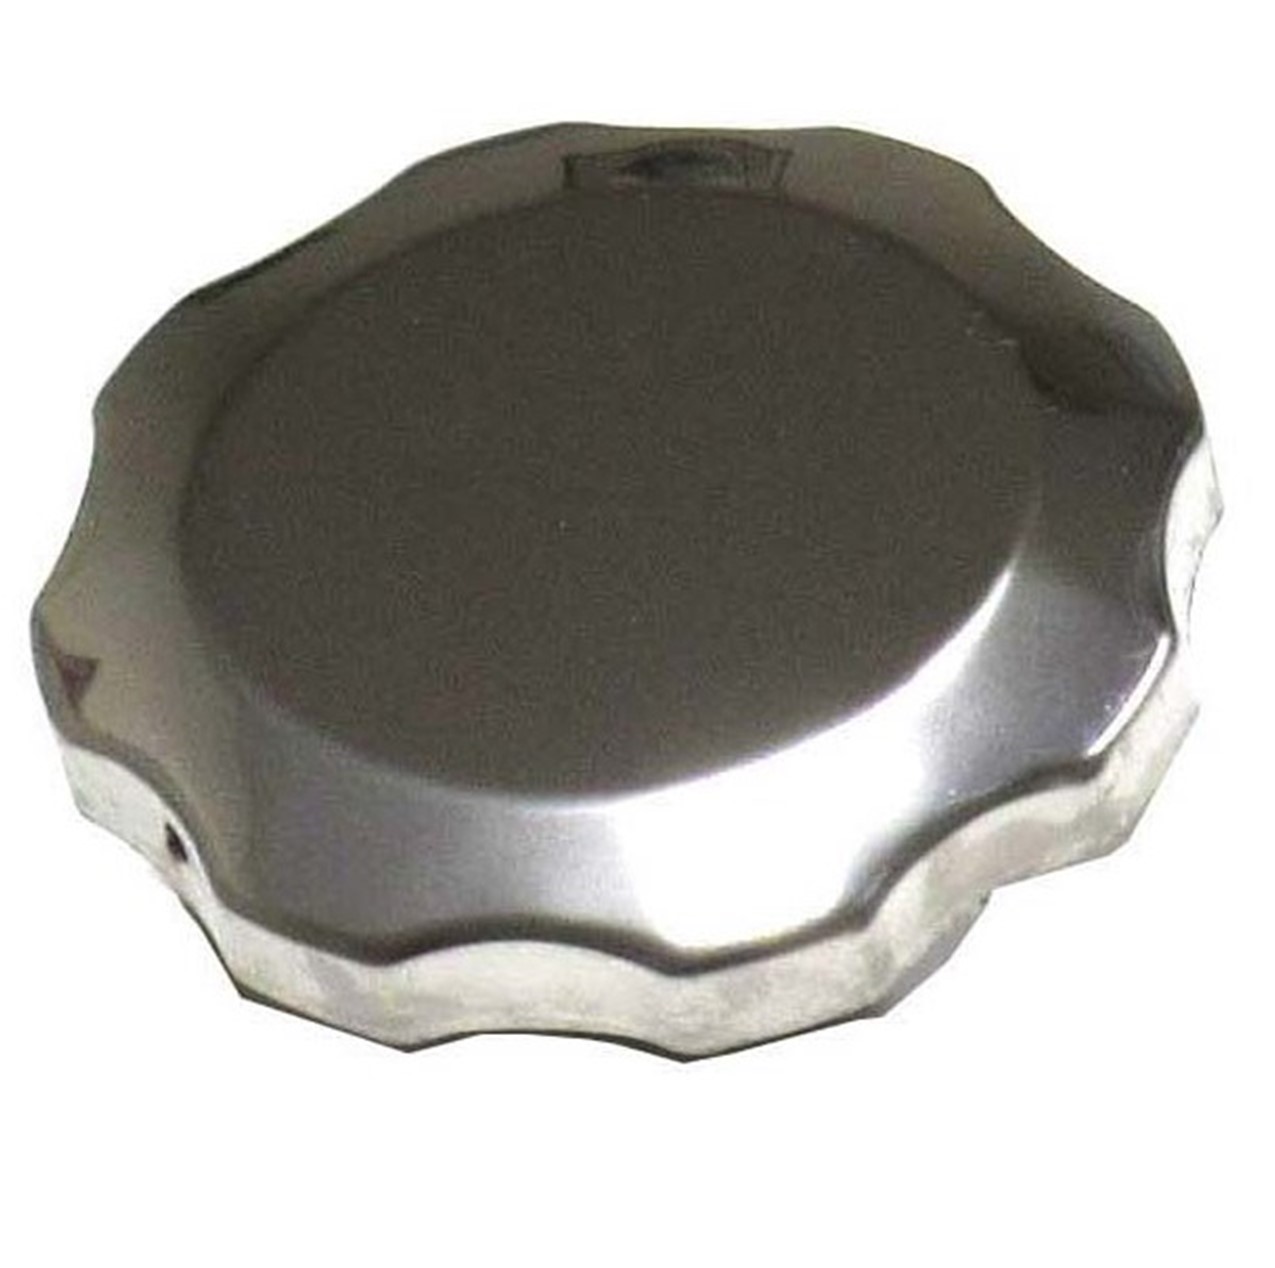 Gas Cap 38mm Chrome OD=70mm Fits ATVs, GoKarts, Minibikes, Power Equipment Fits Honda GX Type Motors + Others - Click Image to Close